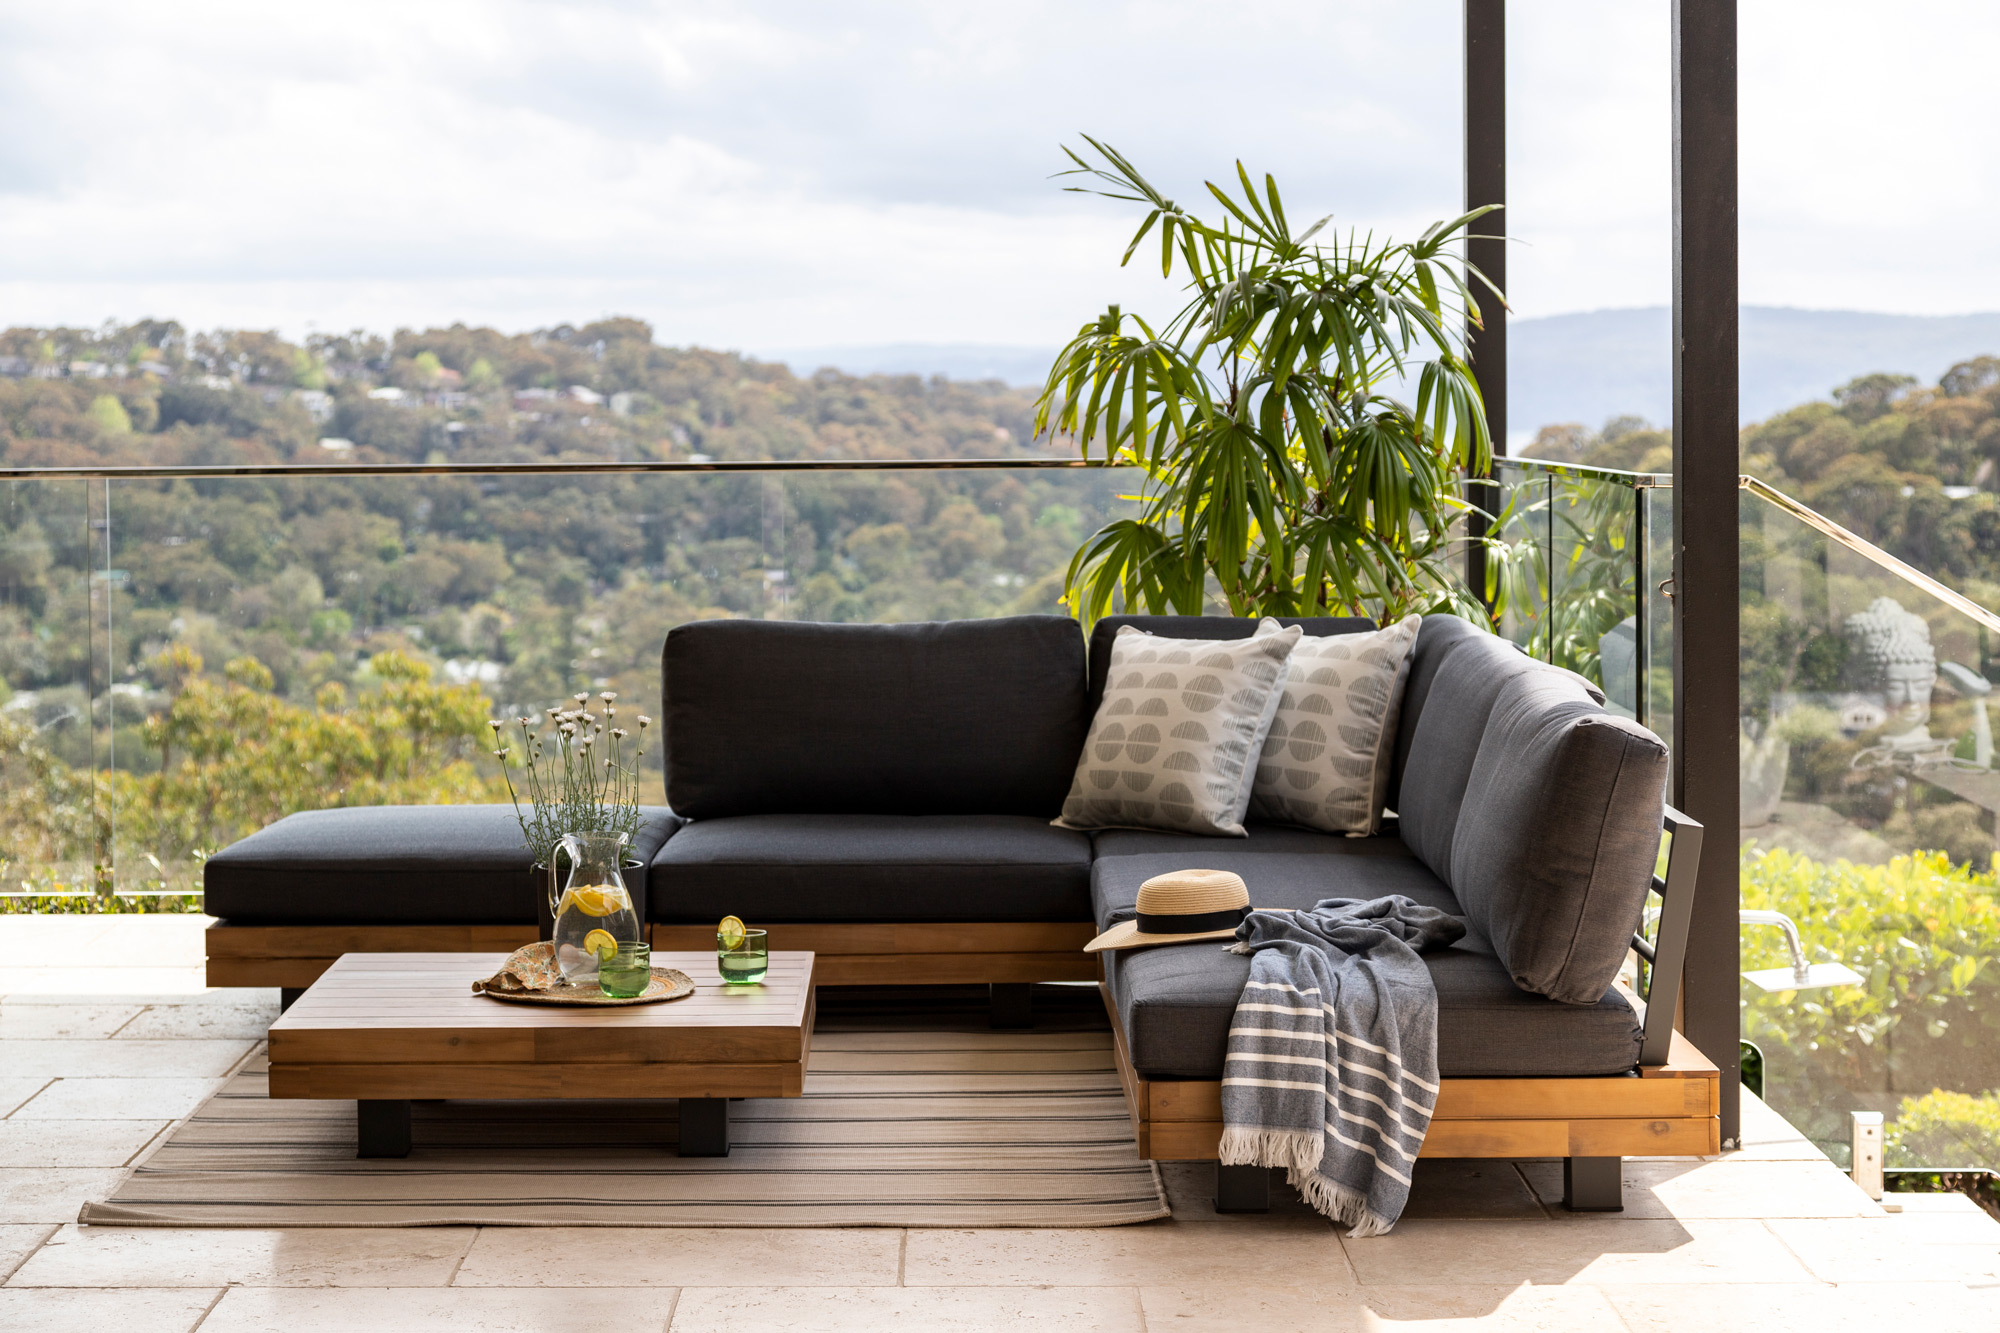 Alfresco aesthetic: how to choose the right outdoor living range for your home